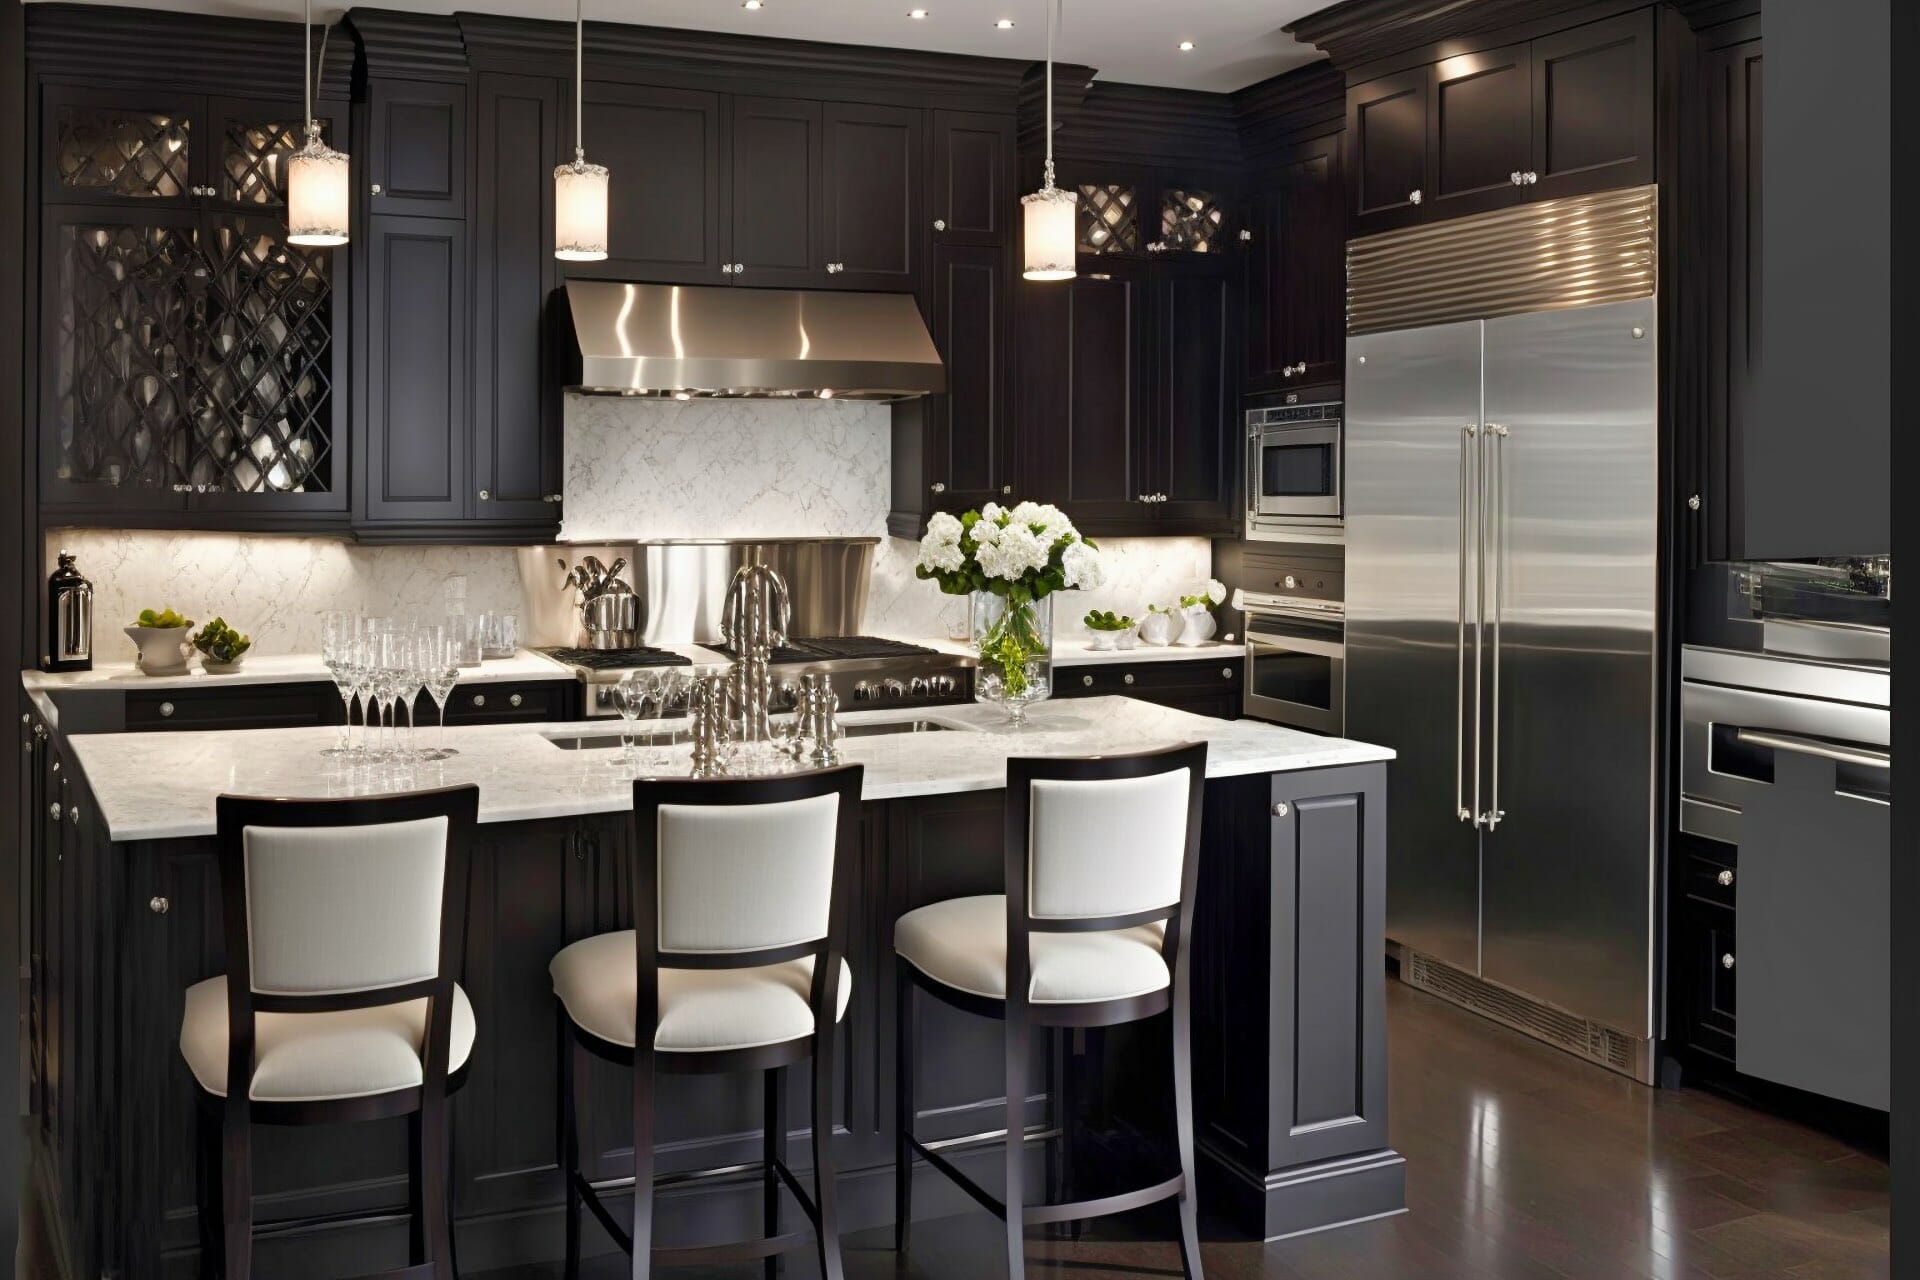 This Elegant Modern Kitchen Features Black Cabinetry And White Countertops, Creating A Chic And Inviting Atmosphere. The Stainless Steel Appliances Add A Contemporary Touch, While The Marble Backsplash And Statement Lighting Complete The Look.